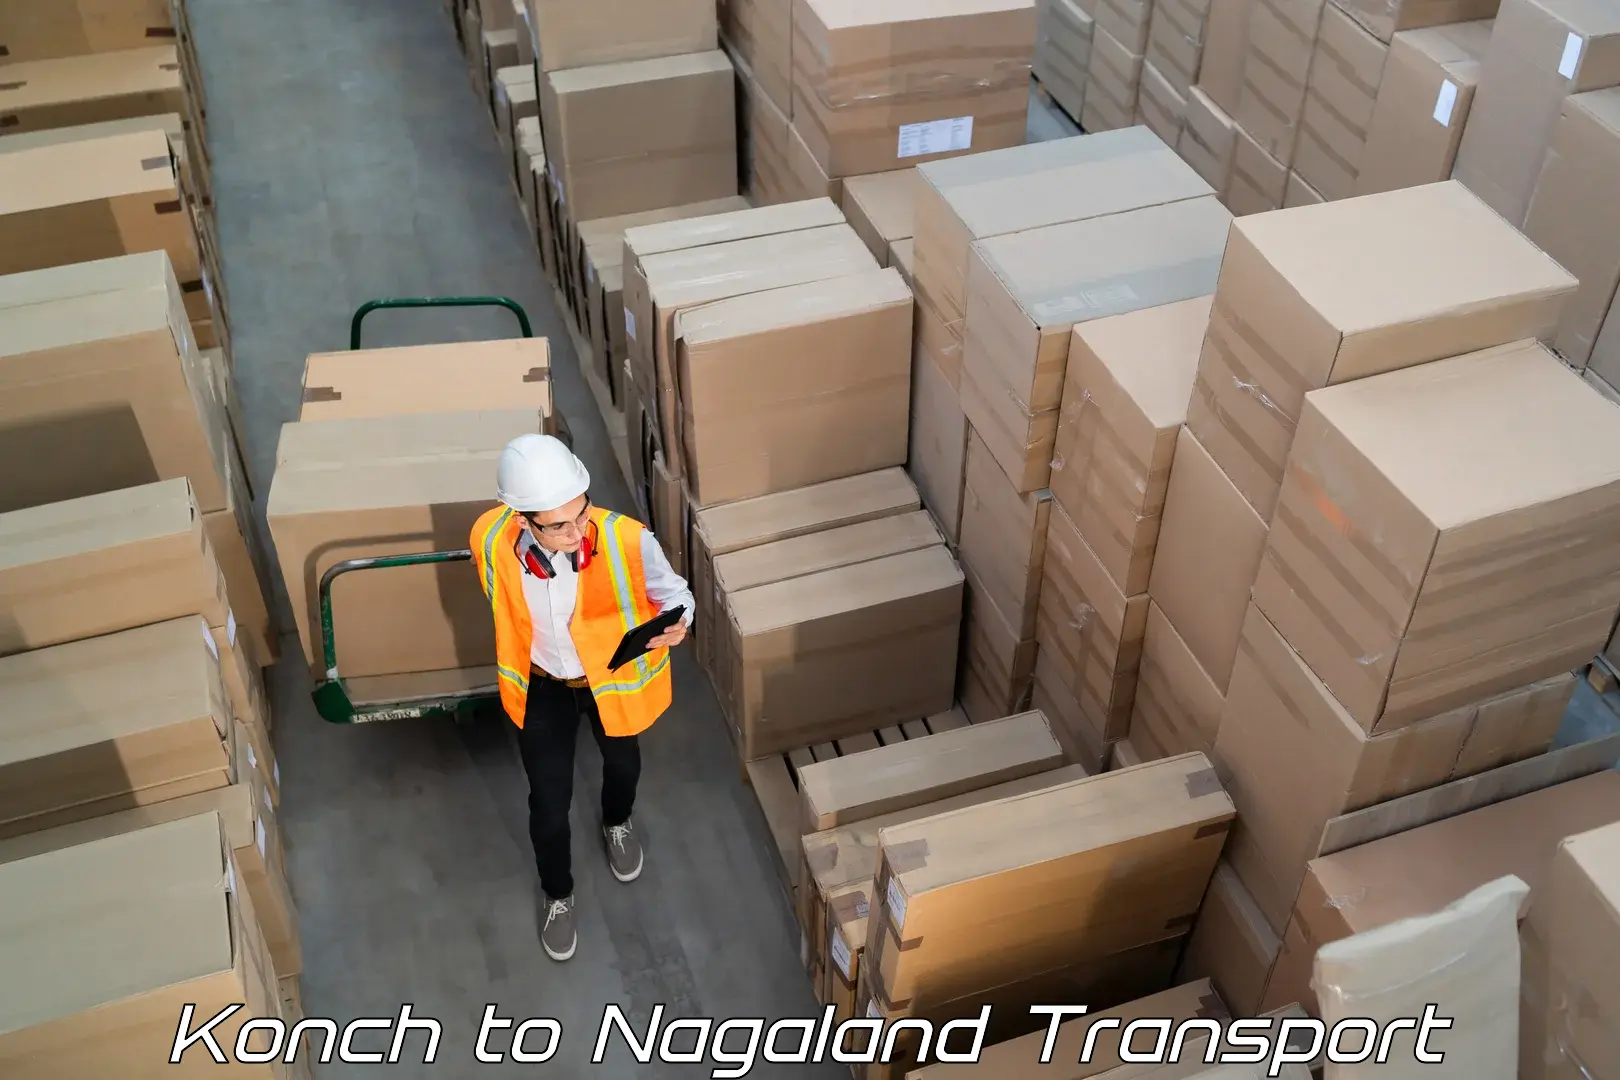 All India transport service Konch to Nagaland